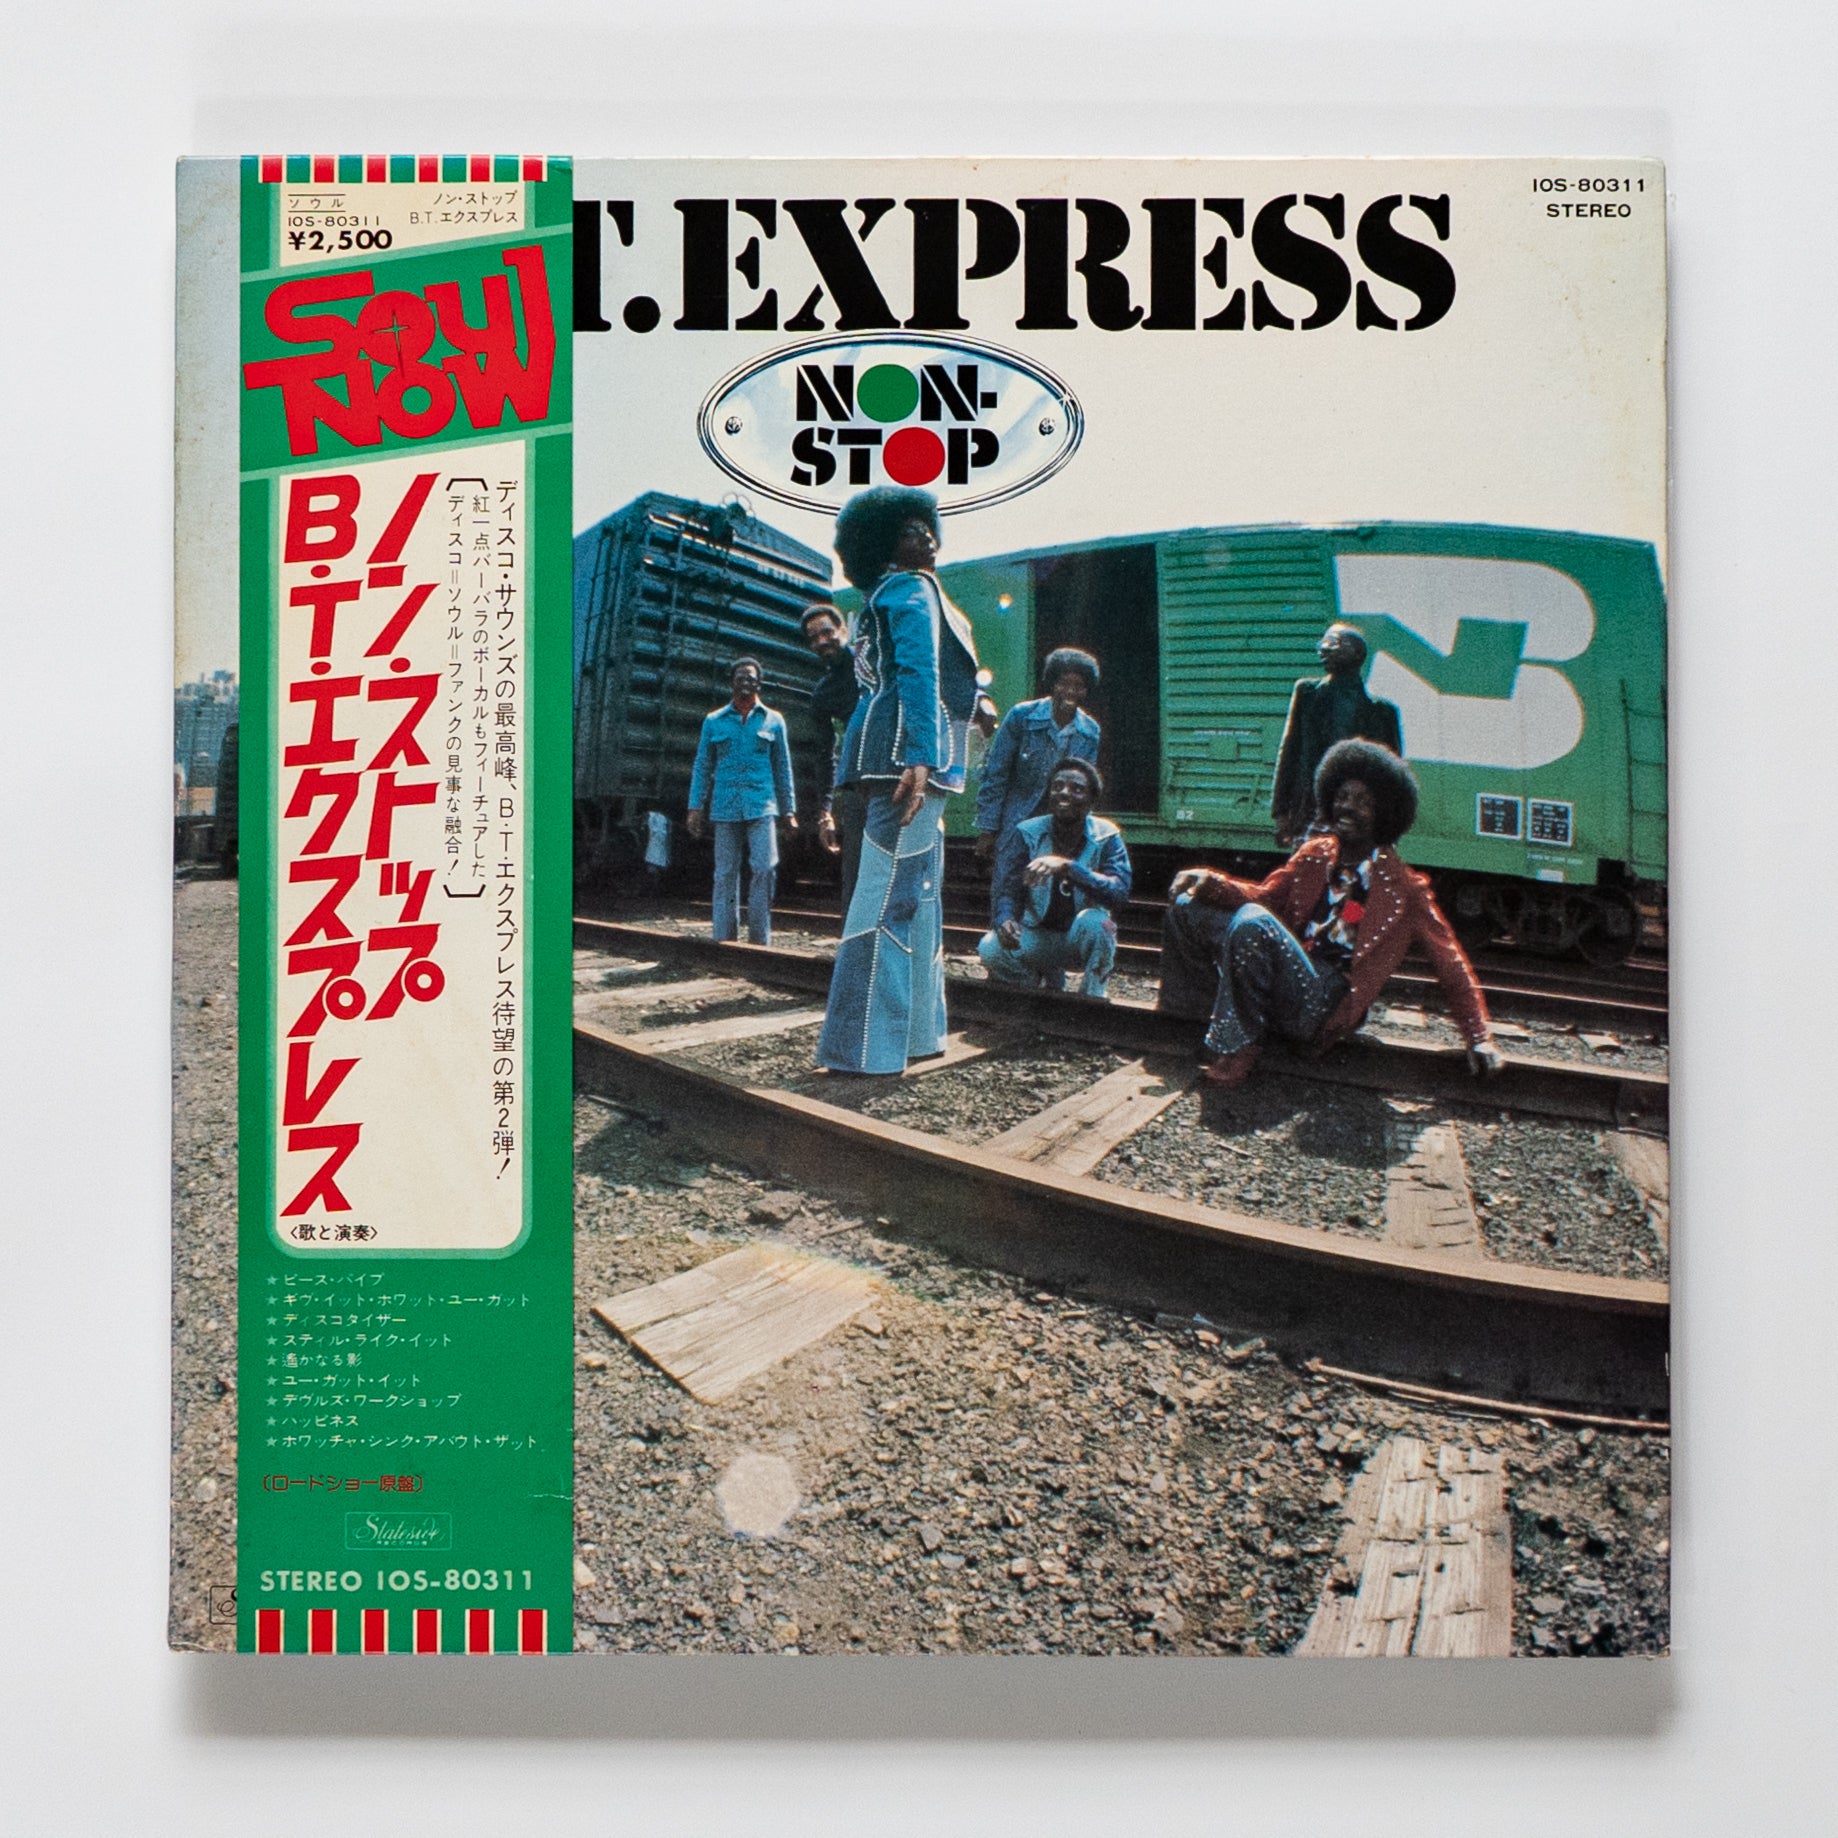 B.T.Express / Non-Stop – Jeff Records